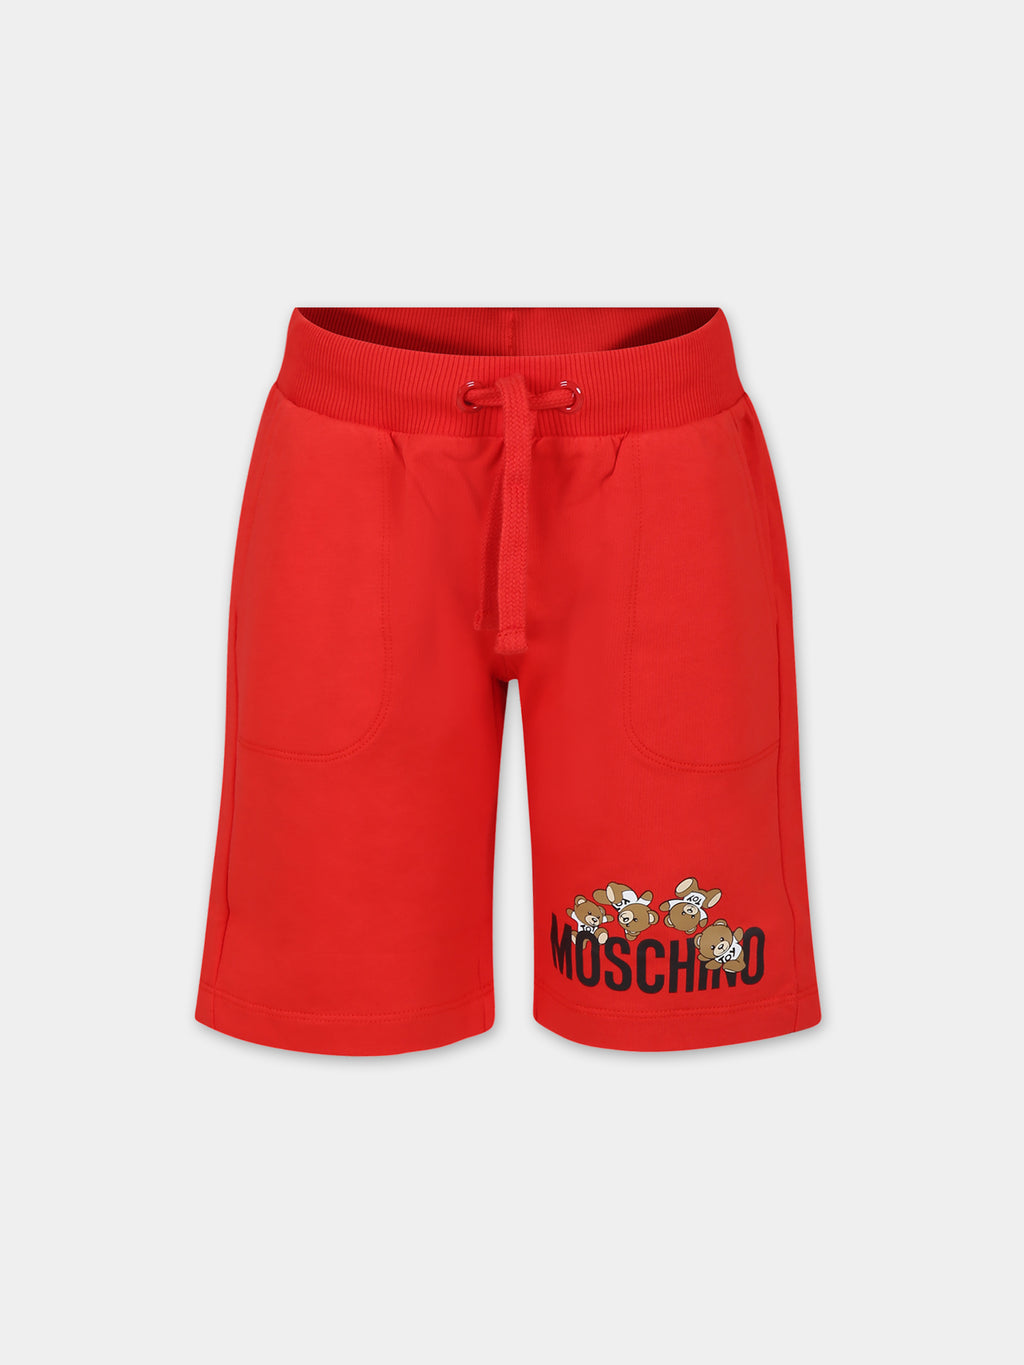 Red shorts for kids with Teddy Bears and logo